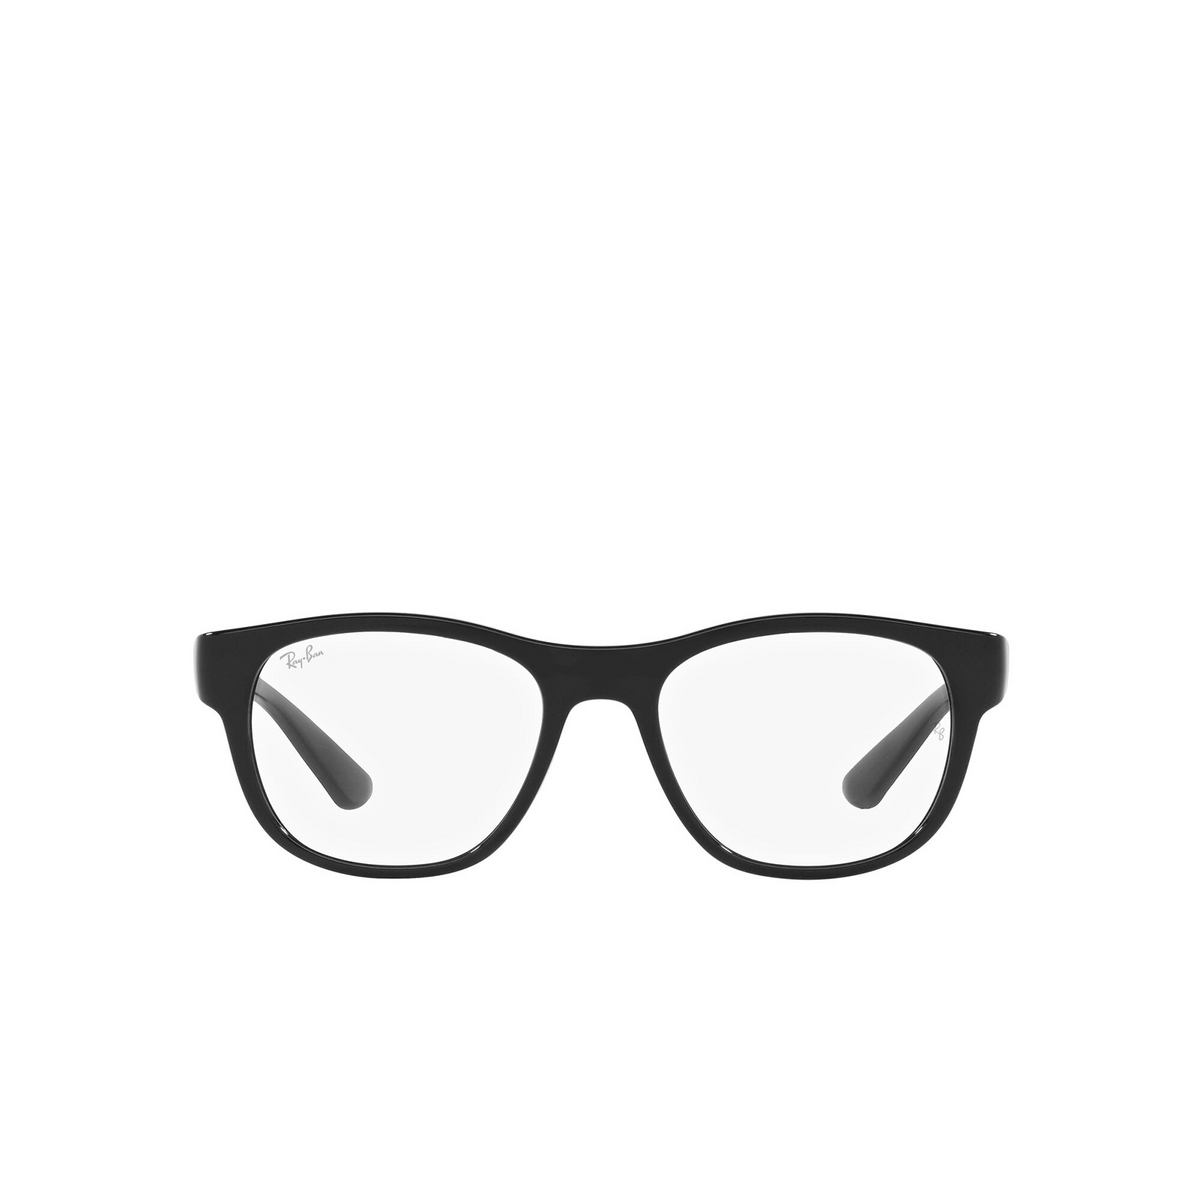 Ray-Ban® Square Eyeglasses: RX7191 color Black 2000 - front view.